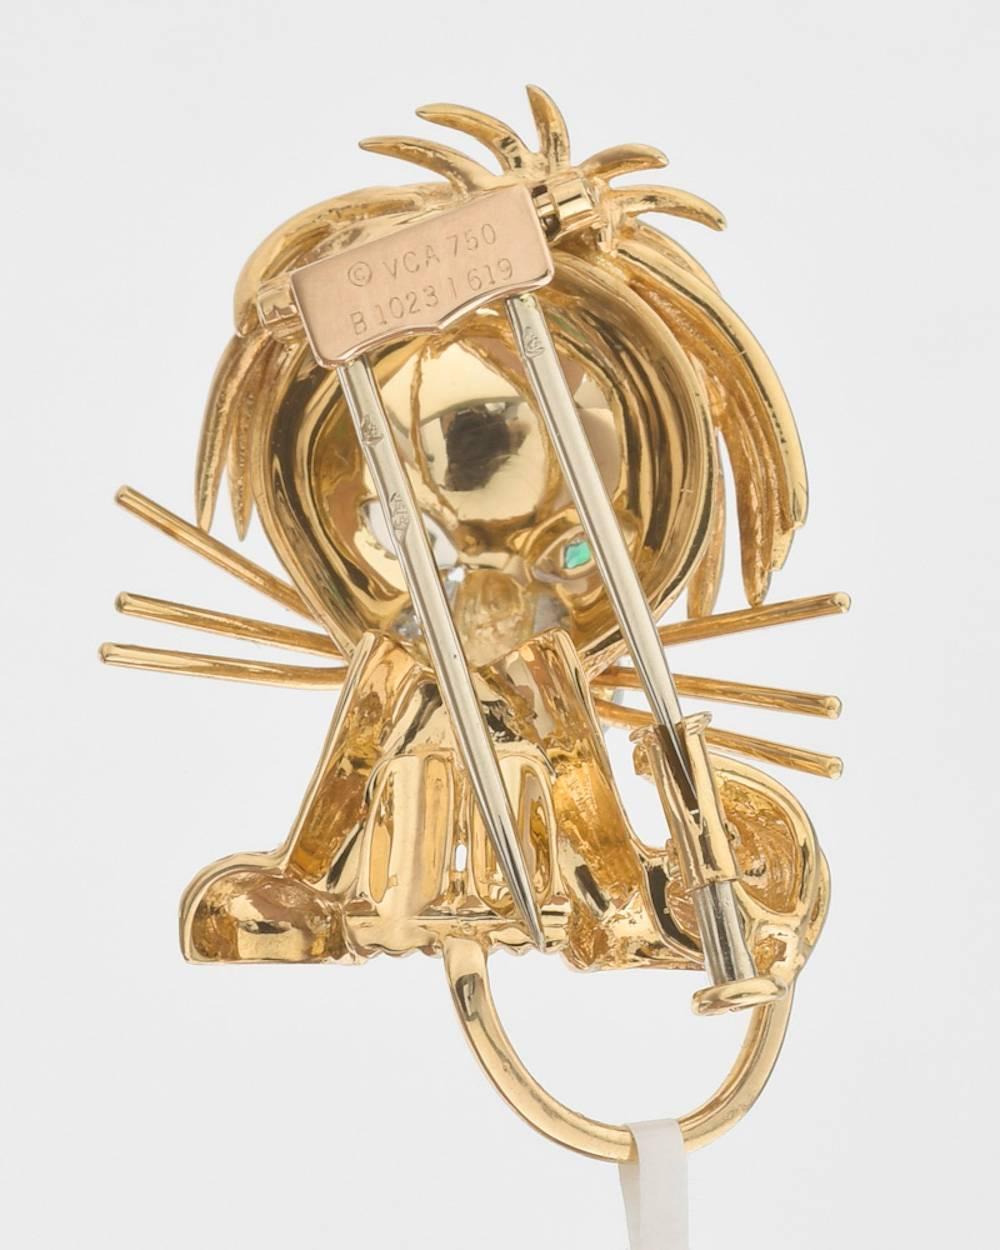 Small whimsical lion cub brooch, in intricately crafted 18k yellow gold and platinum, with pavé-set diamond muzzle, circular-cut emerald eyes and black enamel nose, numbered 1023 1619, signed 'VCA' for Van Cleef & Arpels. Diamonds weighing